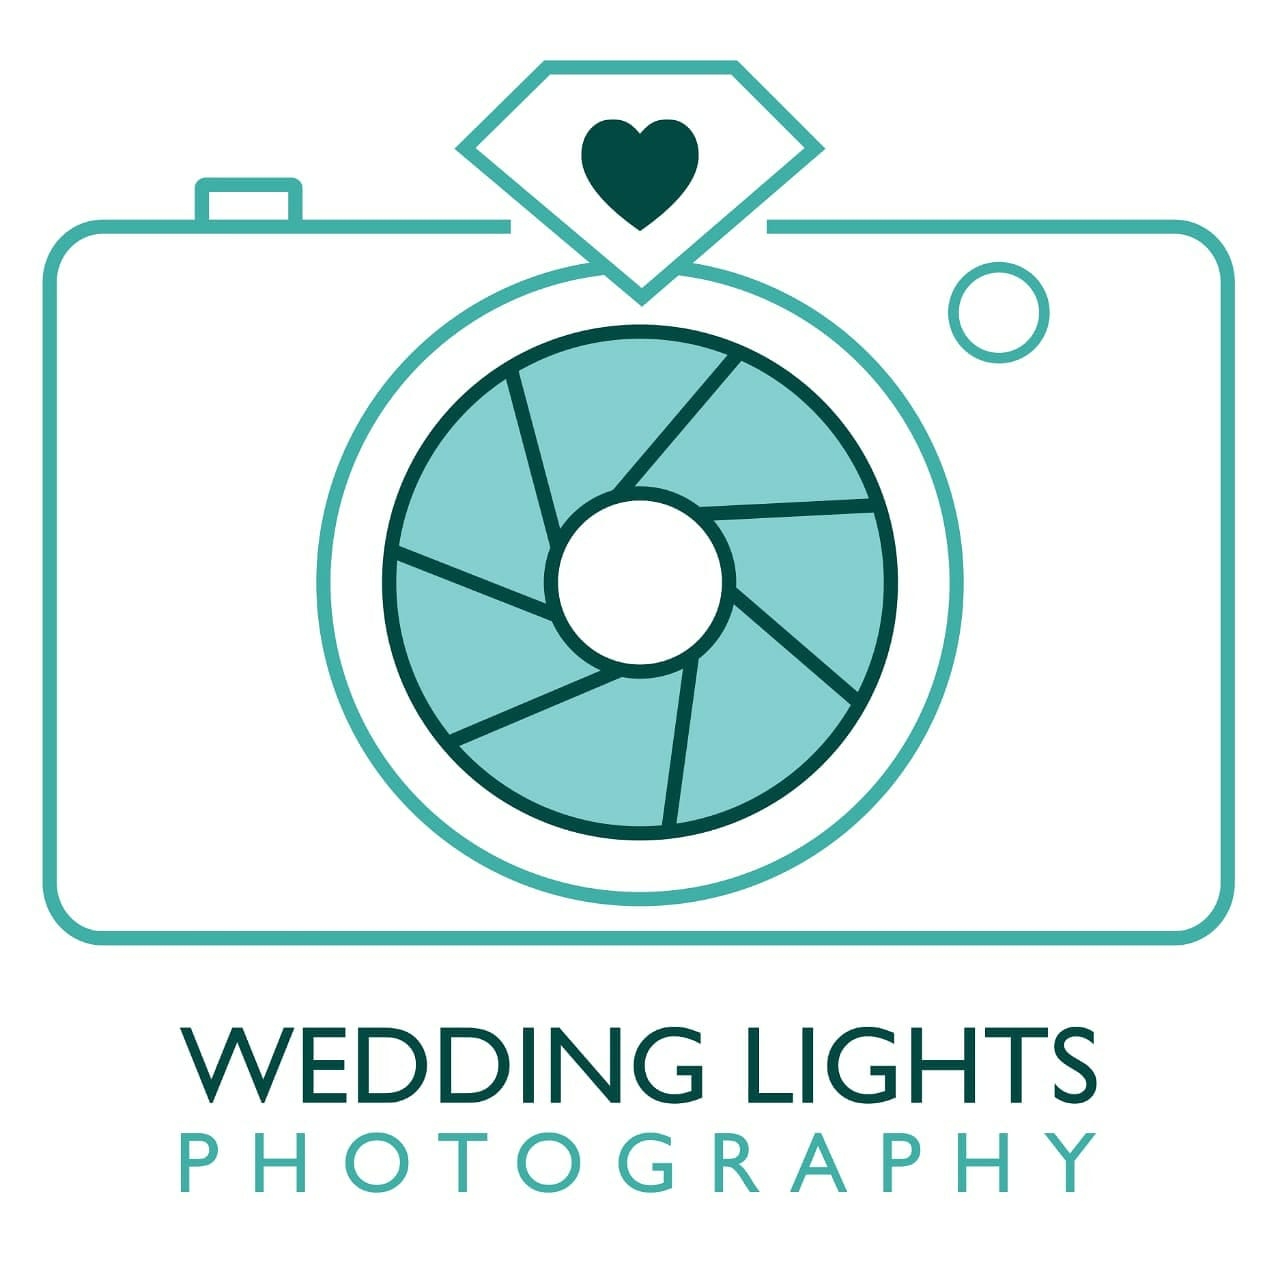 wedding lights photography|Photographer|Event Services